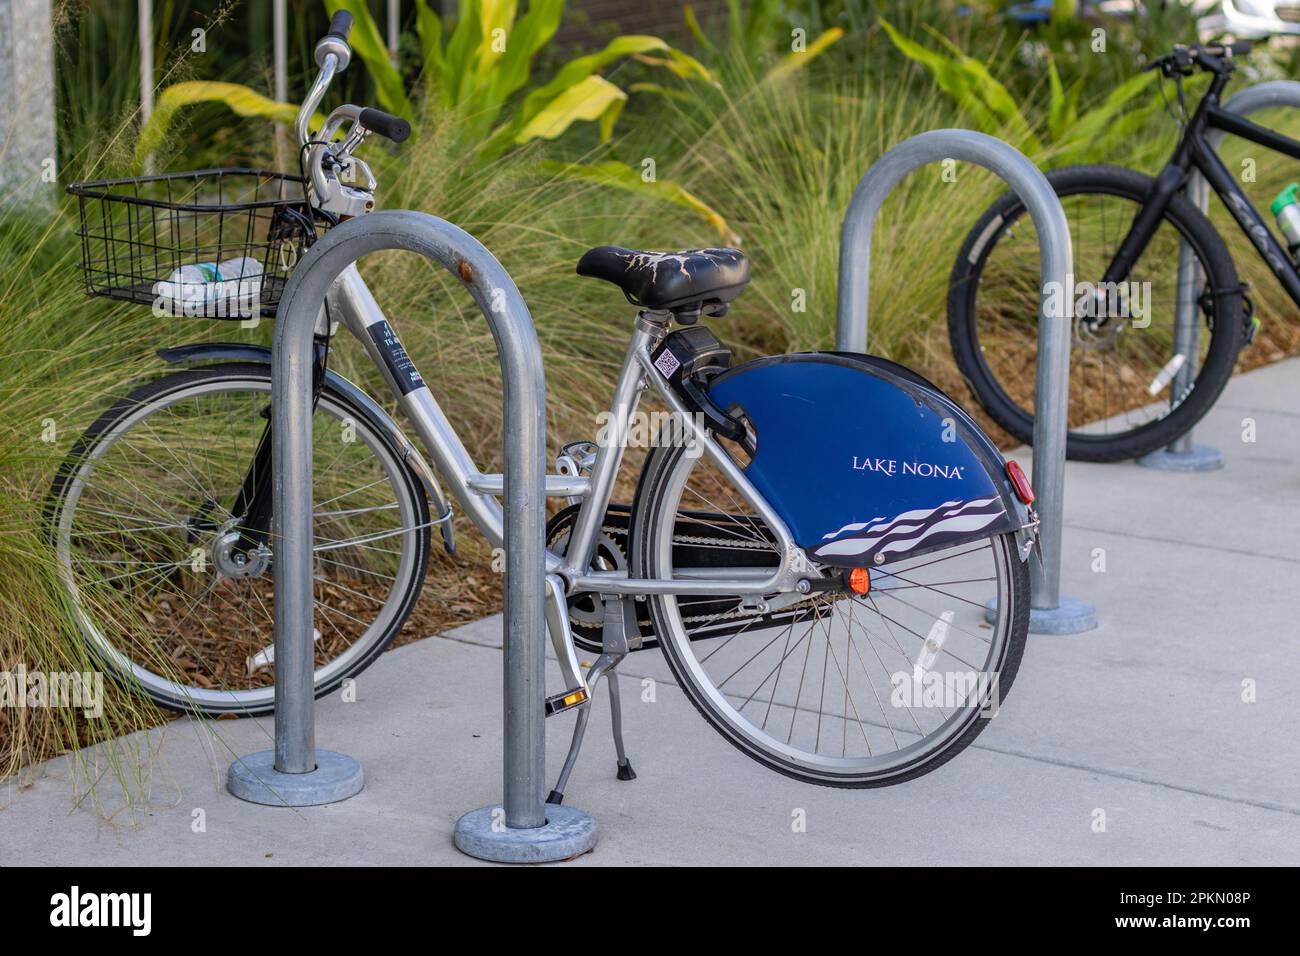 Lake Nona City bike parked at the bicycle parking station. Taken in the Lake Nona area, Florida. Stock Photo